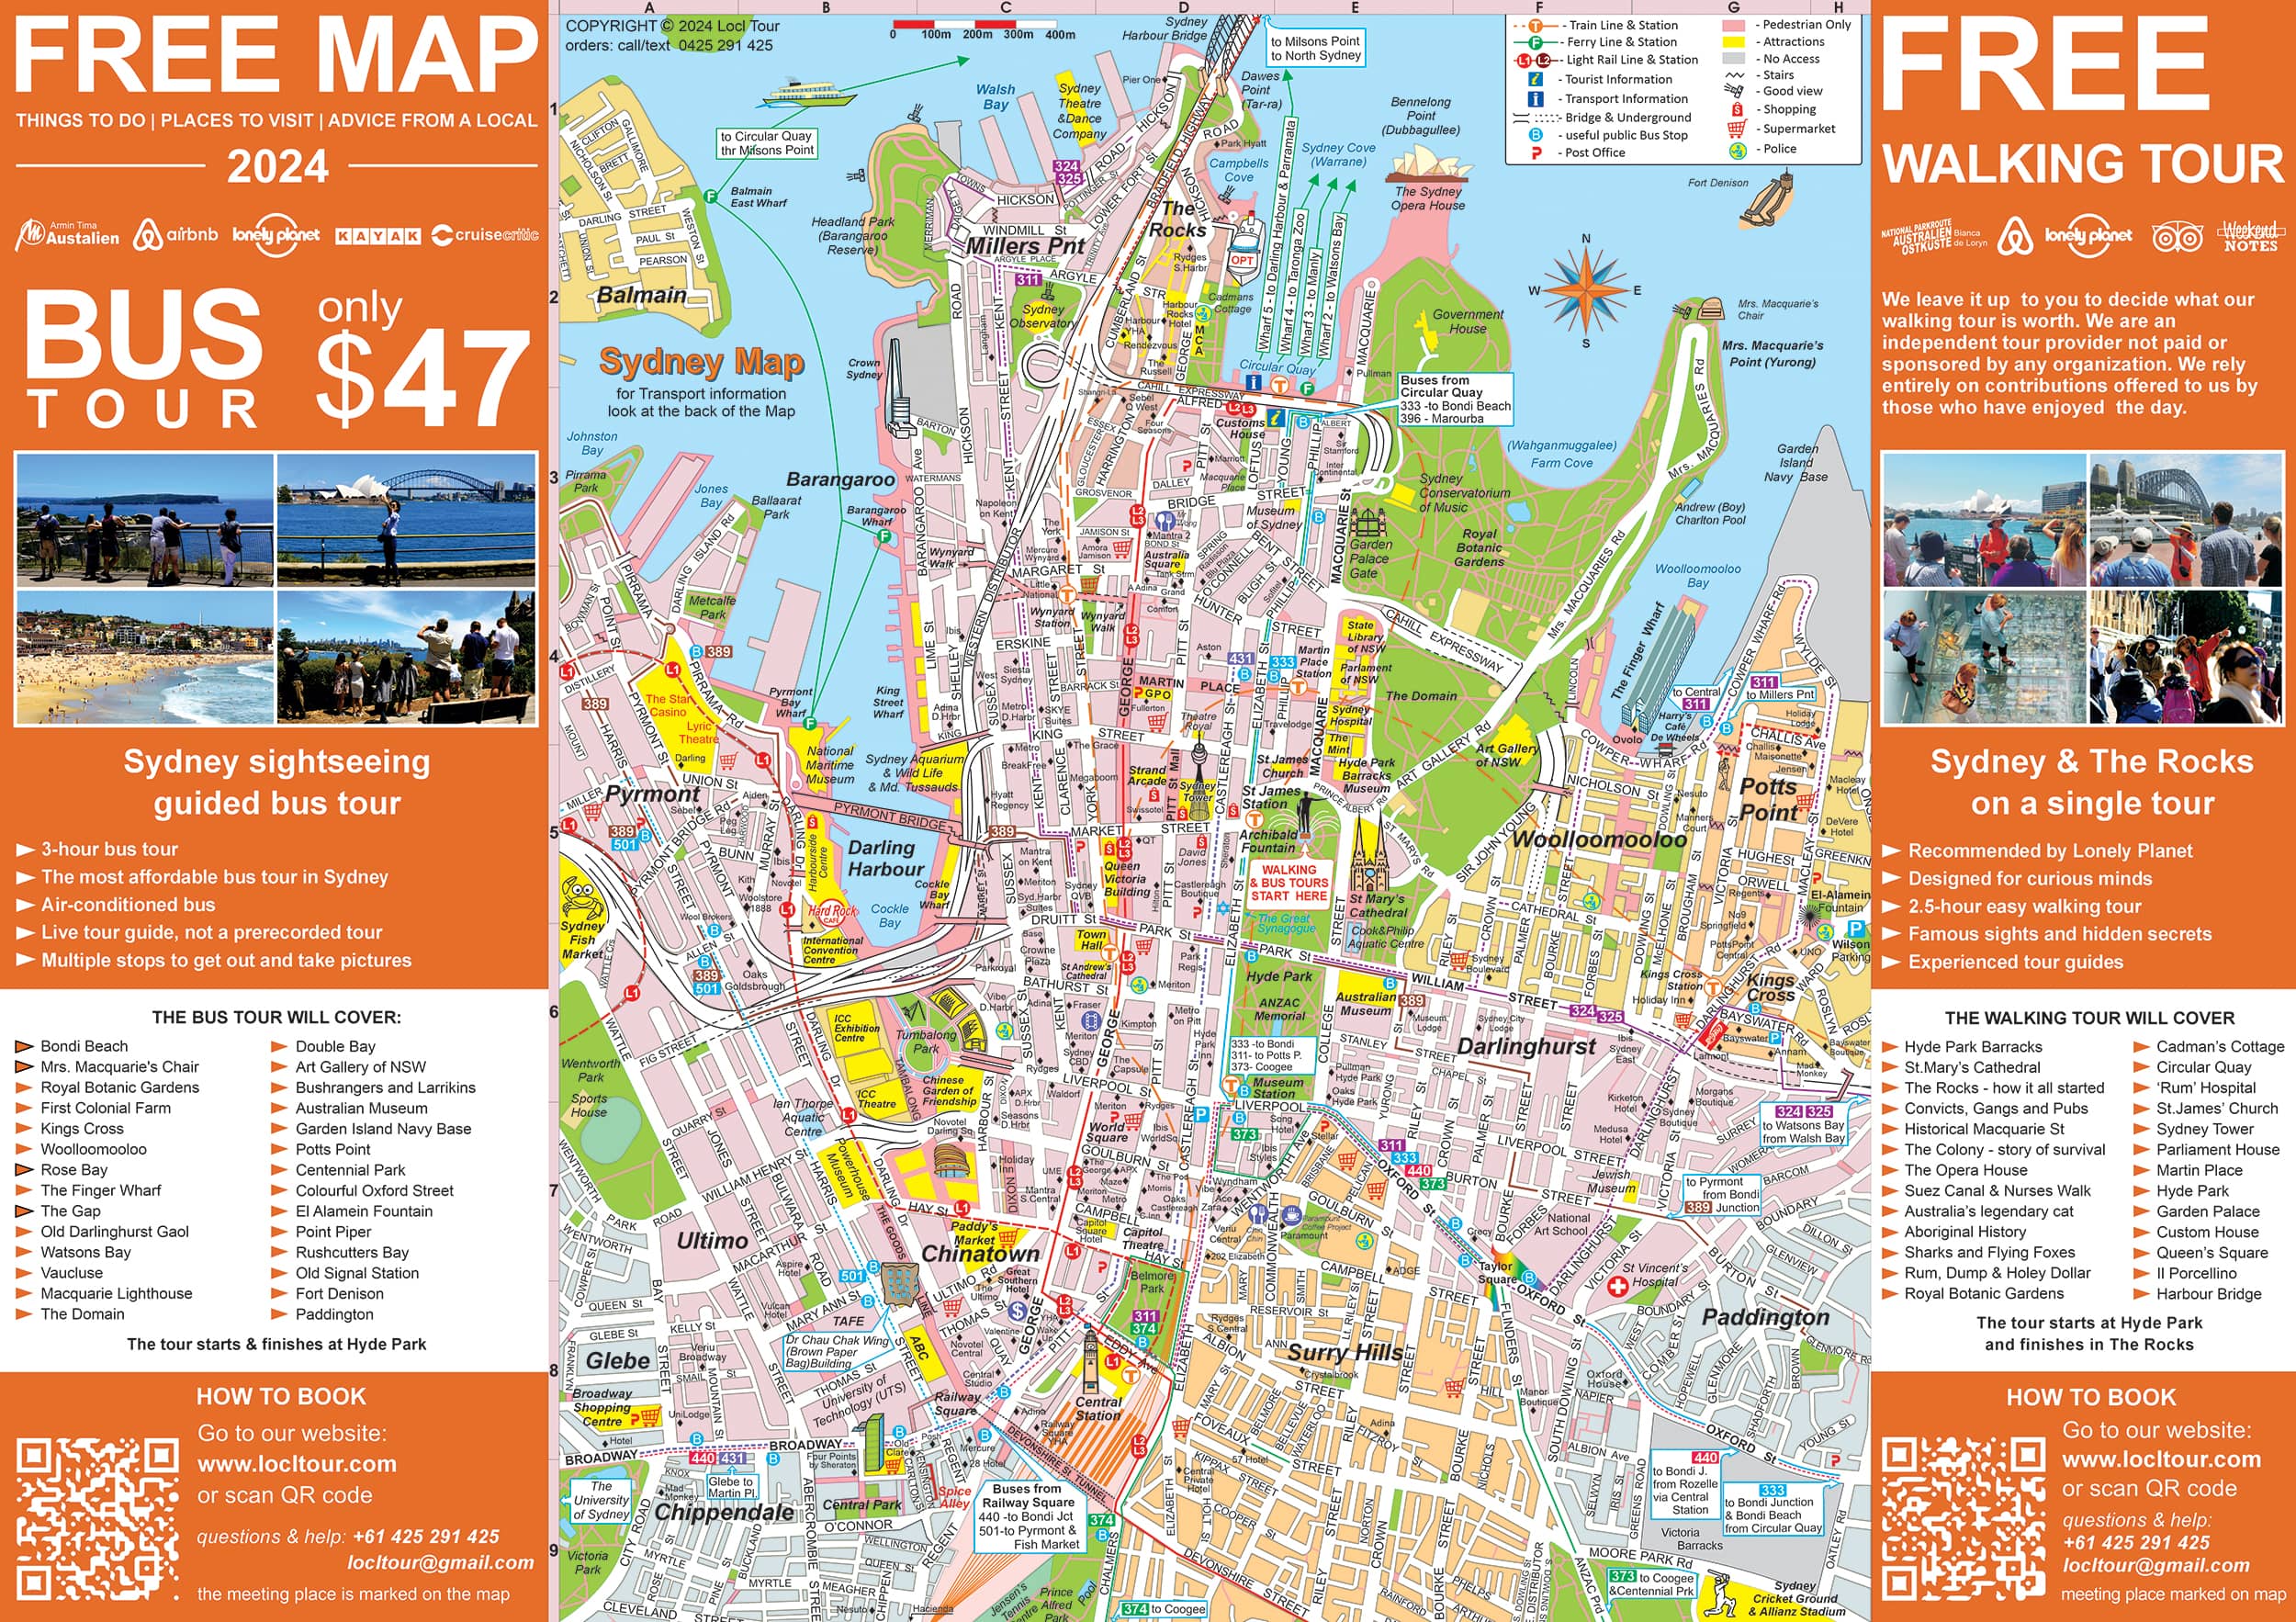 The most detailed tourist map of Sydney CBD and the Rocks area. Provides information on tourist attractions, sightseeing, places to visit and free things to do in Sydney, Australia.